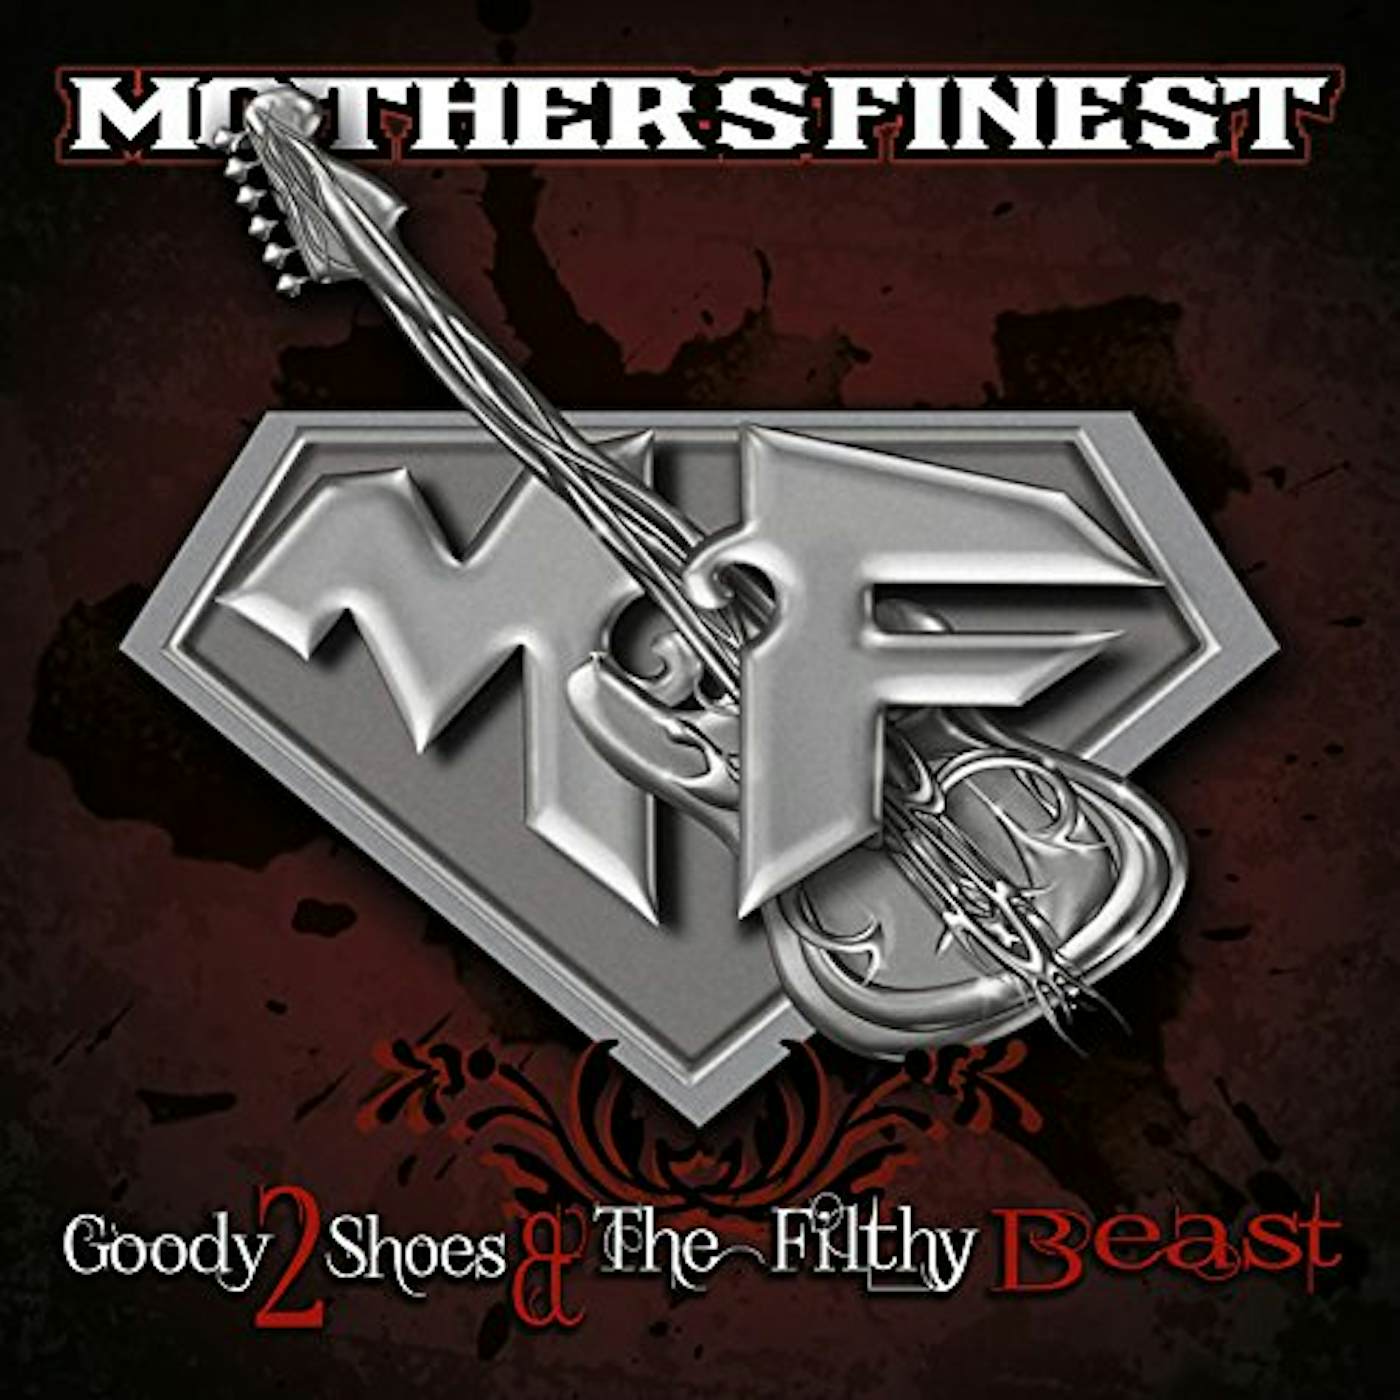 Mother's Finest GOODY 2 SHOES & THE FILTHY BEAST Vinyl Record